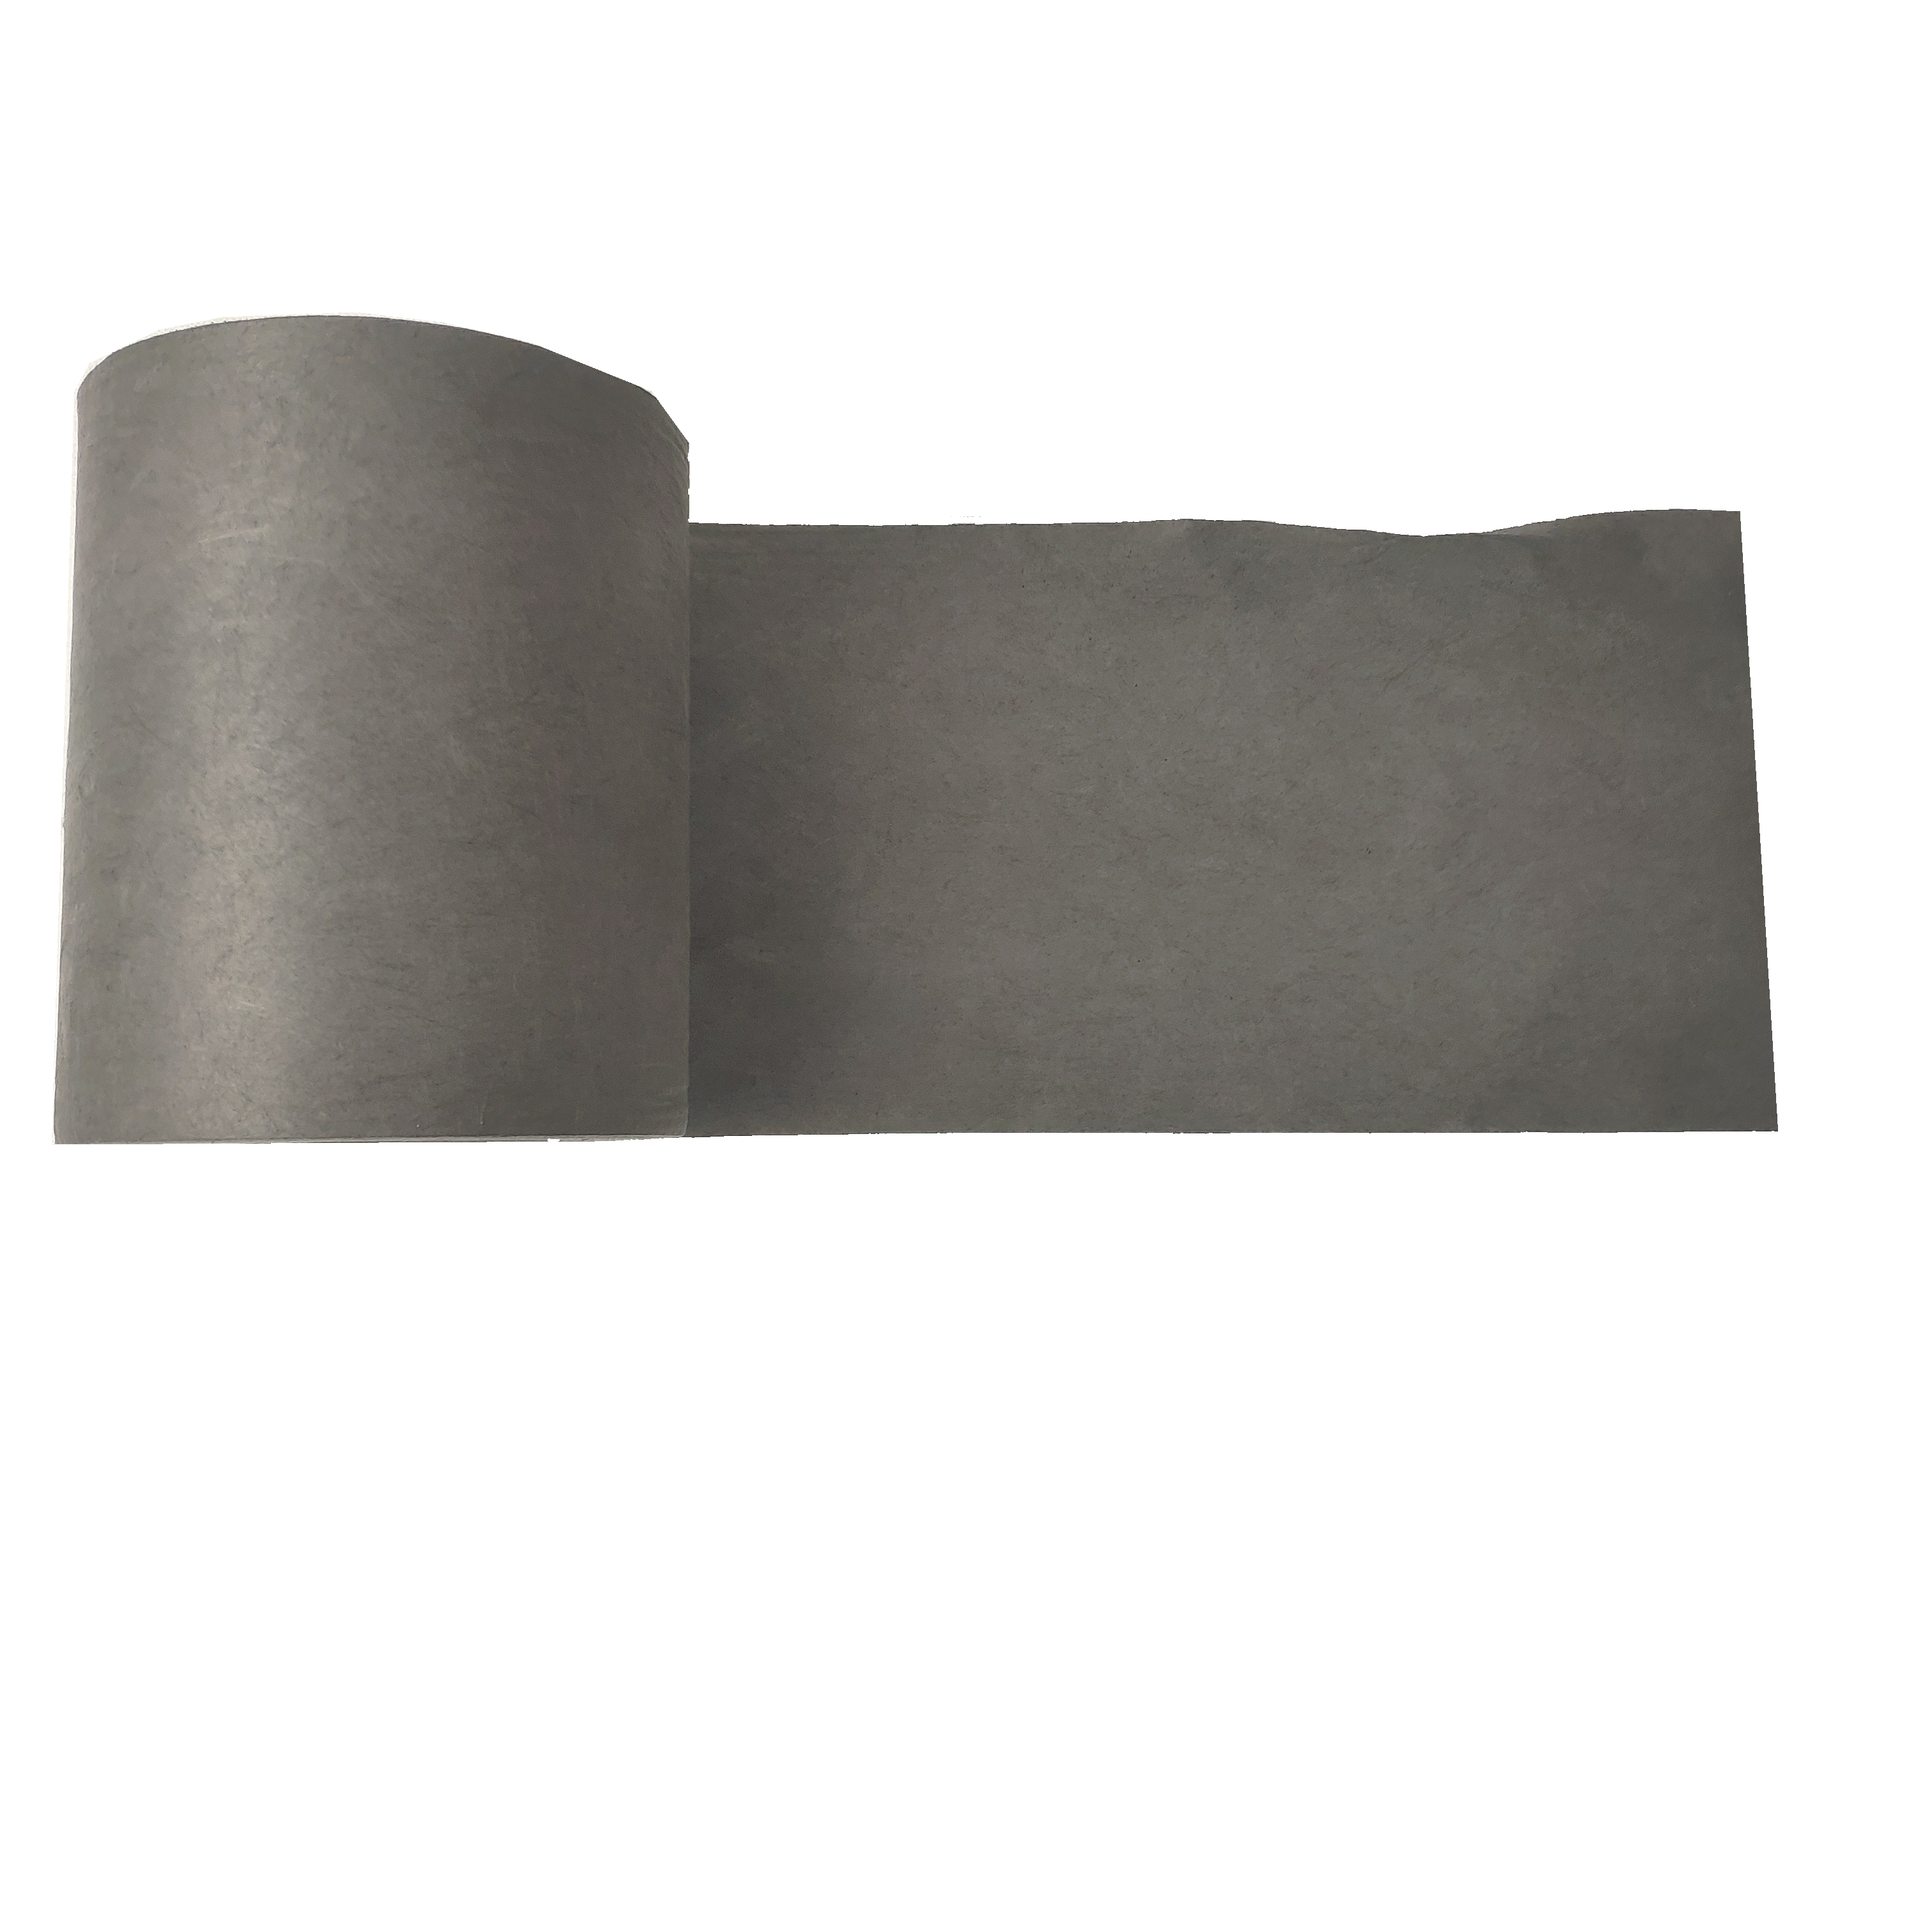 100% PP non woven 25gsm Black Meltblown fabric BFE99% Manufacturers, 100% PP non woven 25gsm Black Meltblown fabric BFE99% Factory, Supply 100% PP non woven 25gsm Black Meltblown fabric BFE99%